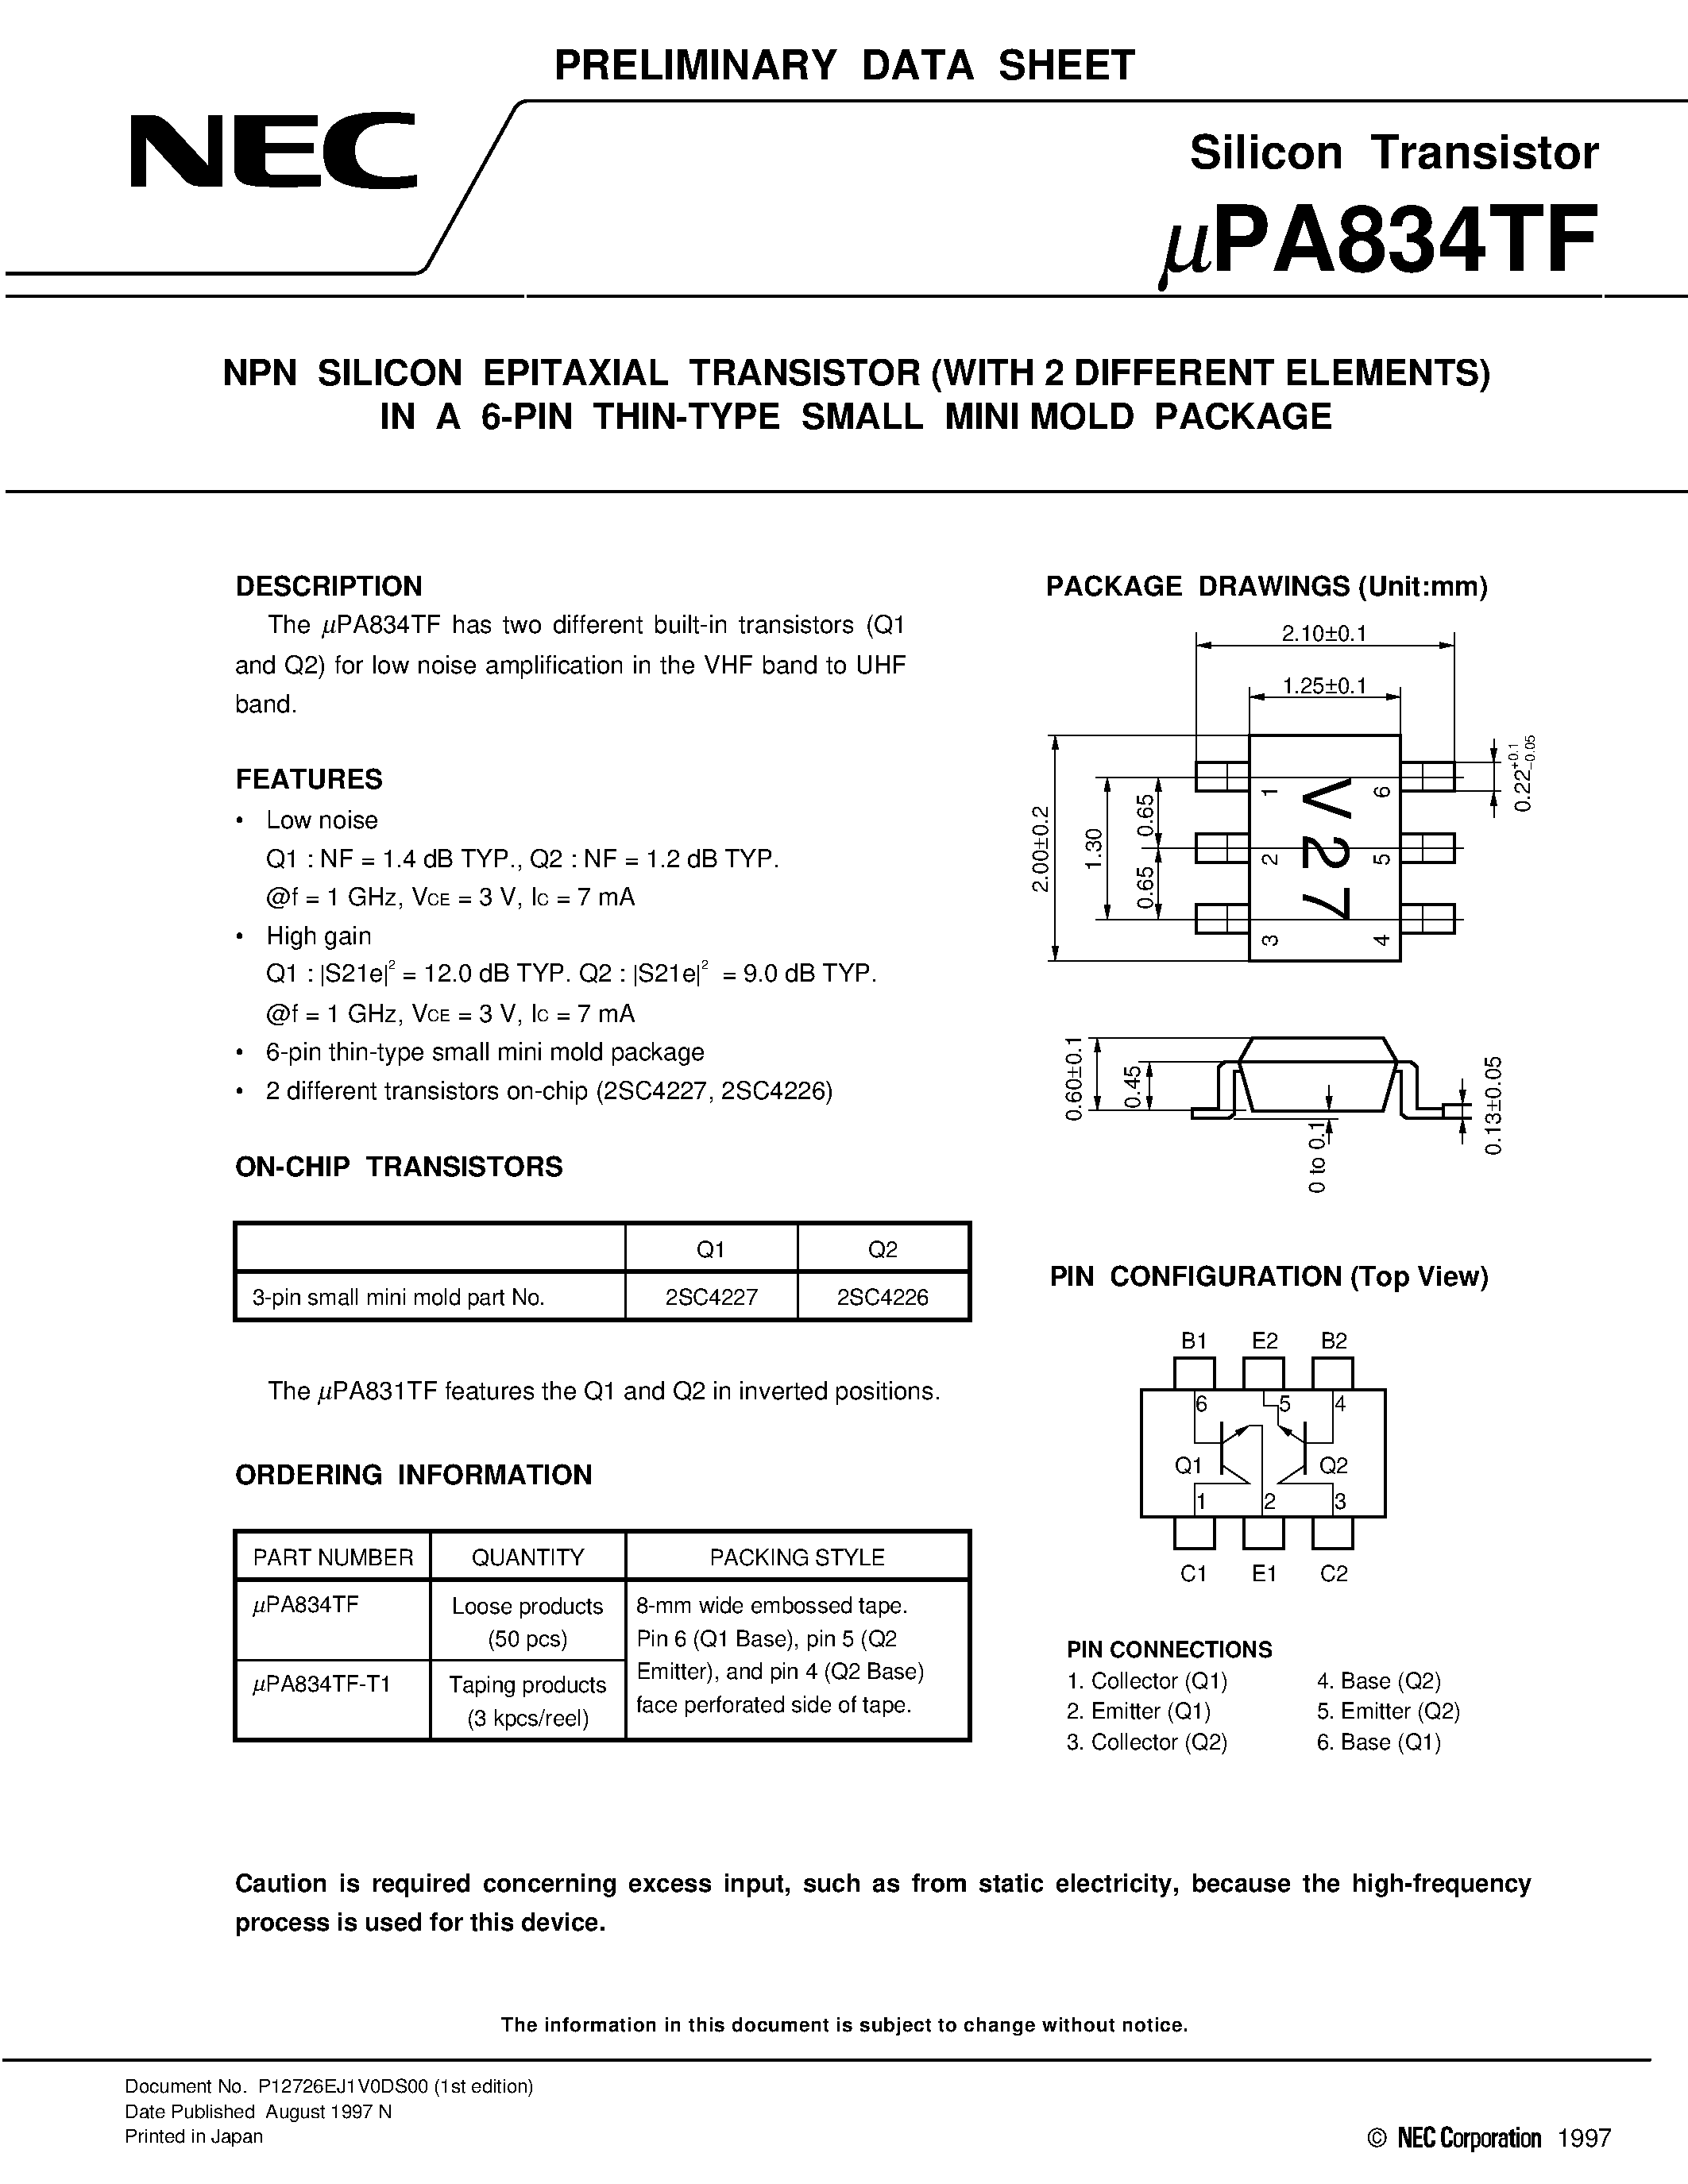 Datasheet UPA834TF - NPN SILICON EPITAXIAL TRANSISTOR WITH 2 DIFFERENT ELEMENTS IN A 6-PIN THIN-TYPE SMALL MINI MOLD PACKAGE page 1